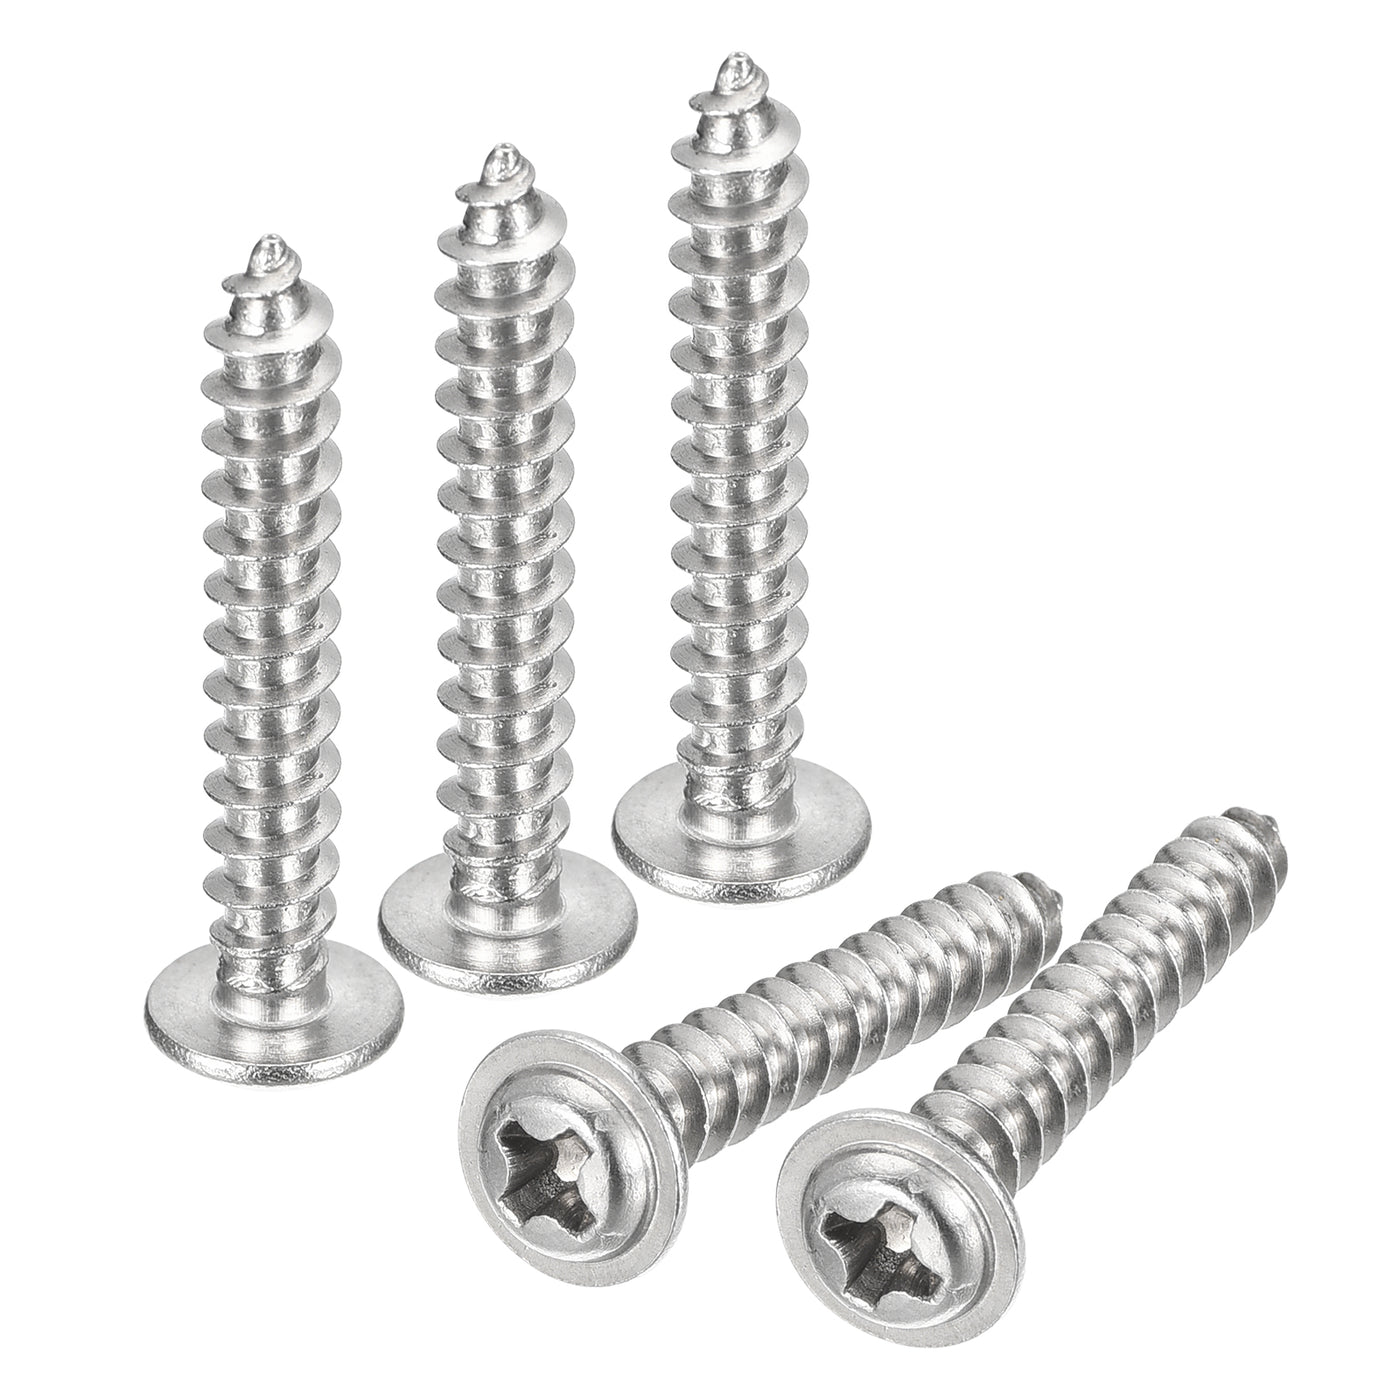 uxcell Uxcell ST4x25mm Phillips Pan Head Self-tapping Screw with Washer, 100pcs - 304 Stainless Steel Wood Screw Full Thread (Silver)